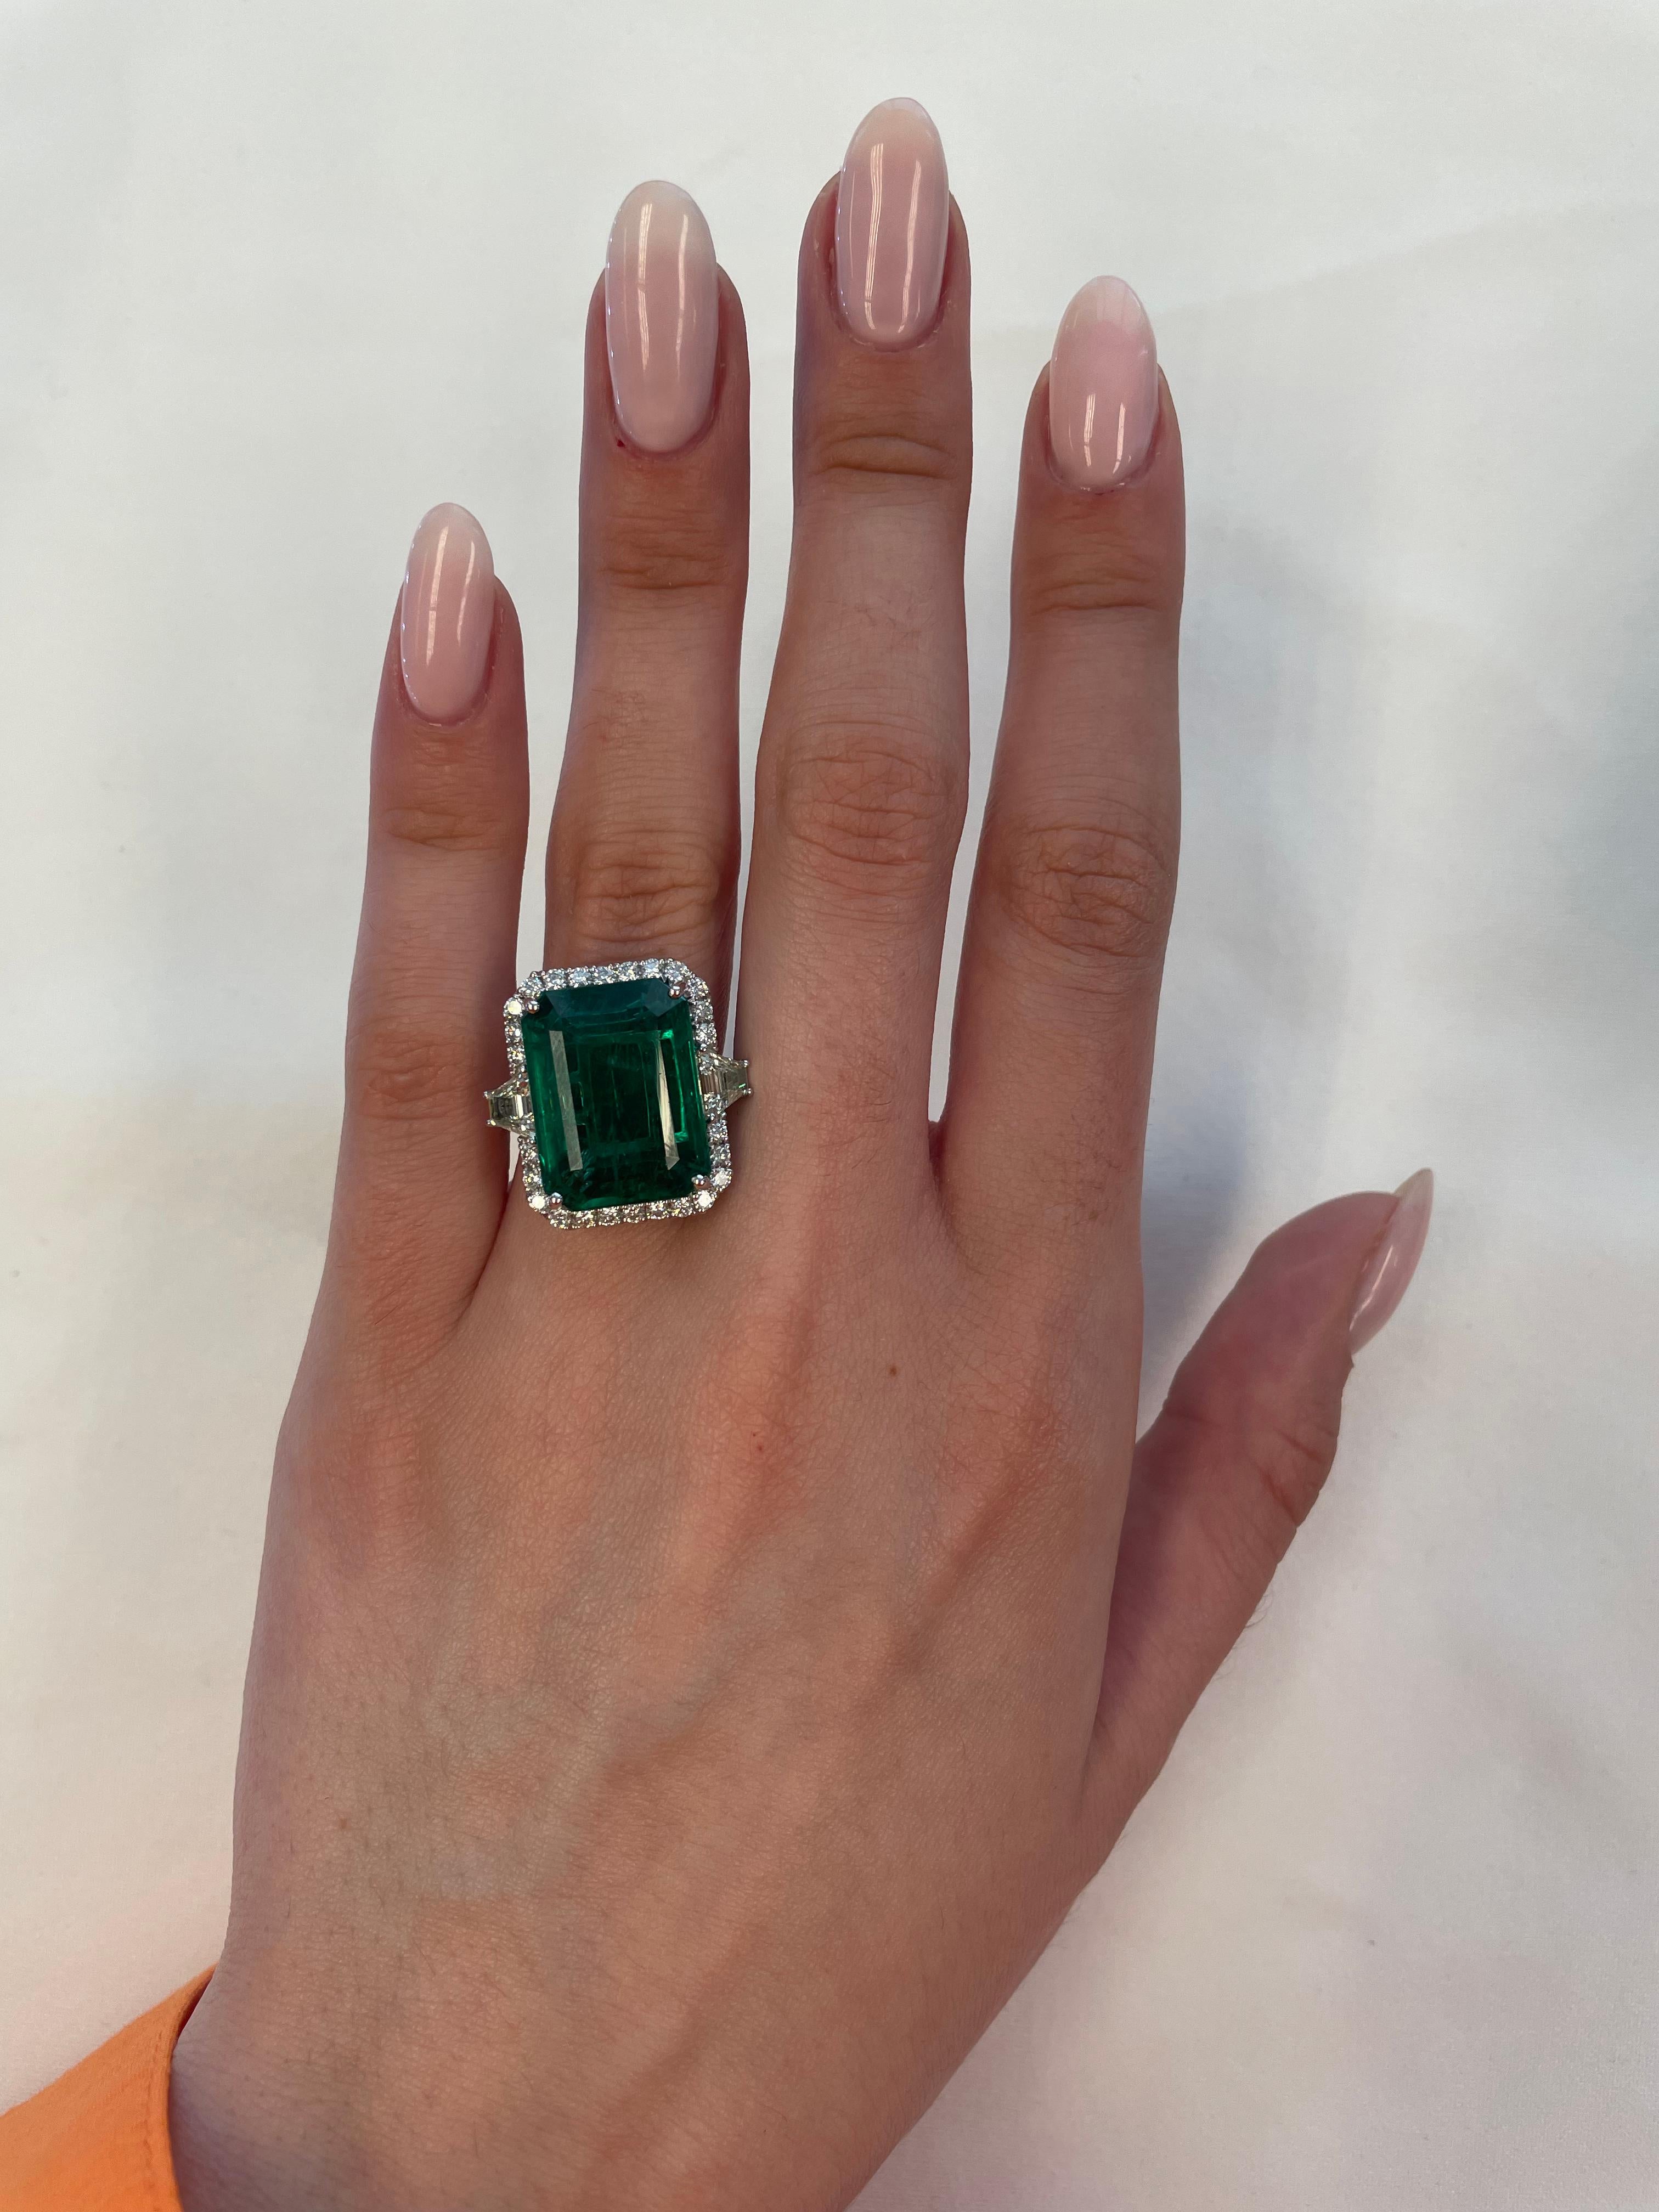 Stunning emerald of superb color and diamond three stone ring with halo, GIA certified. High jewelry by Alexander Beverly Hills. 
14.58 carats total gemstone weight.
*Center emerald faces up like a 20ct stone
13.18 carat emerald cut emerald, GIA